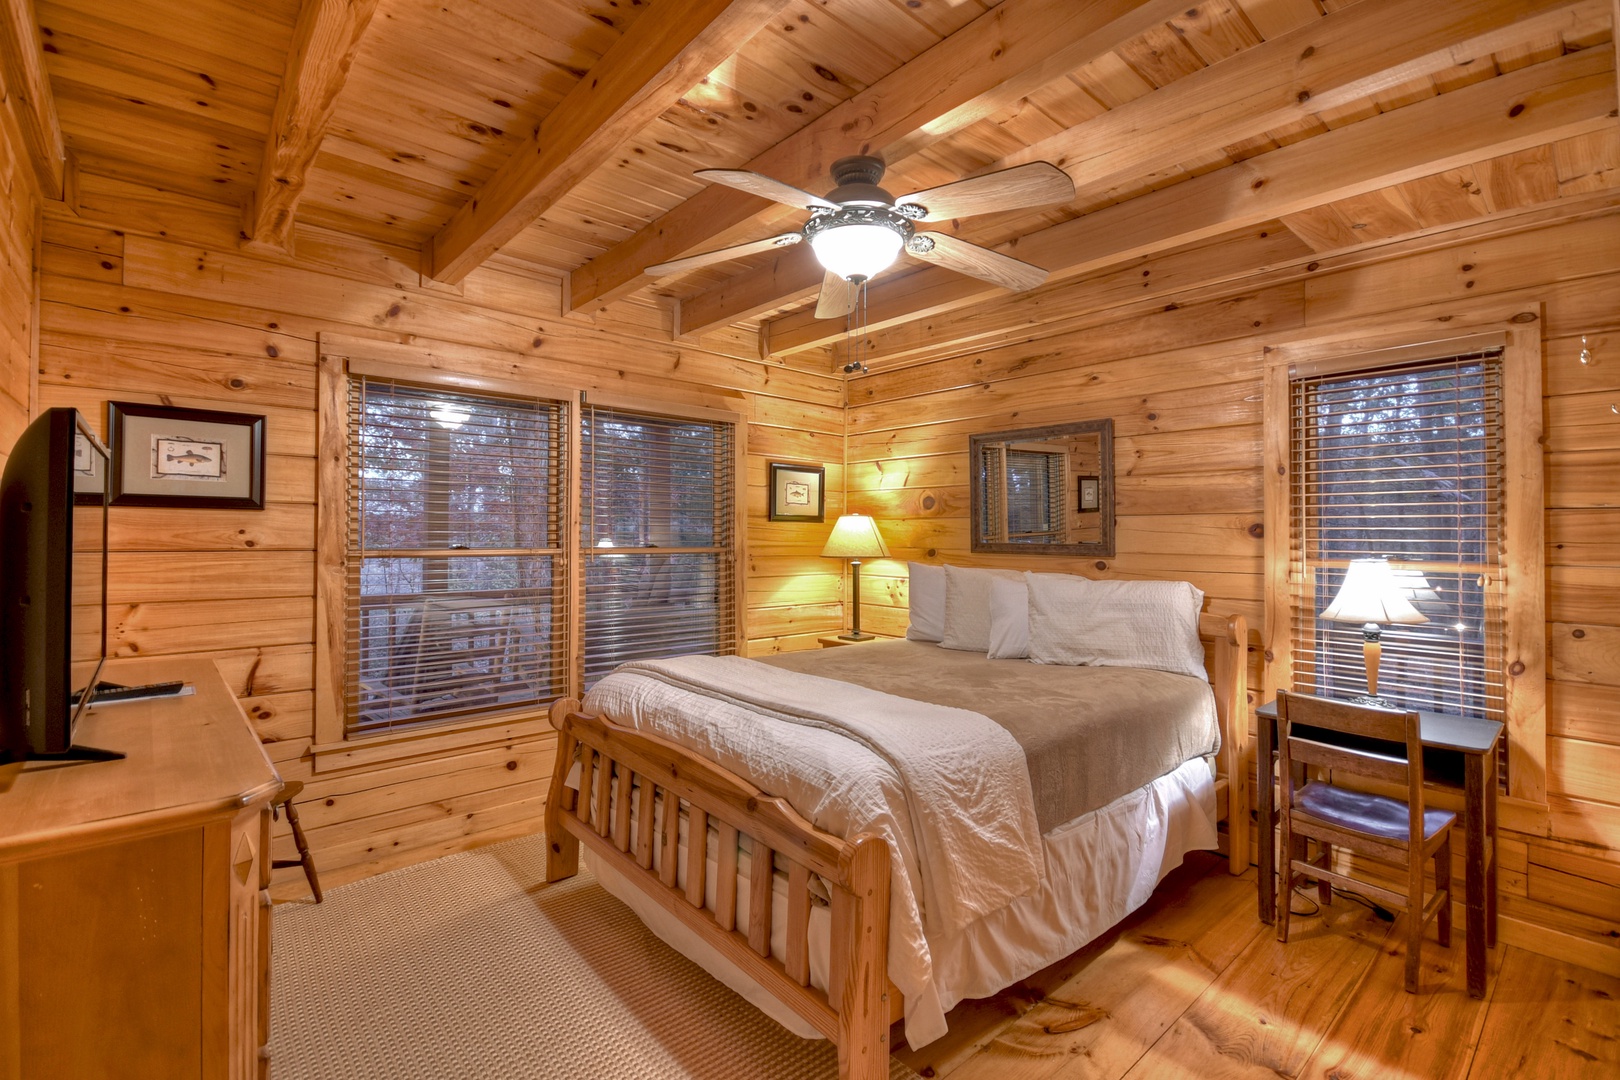 Blue Lake Cabin - Entry Level Queen Bedroom